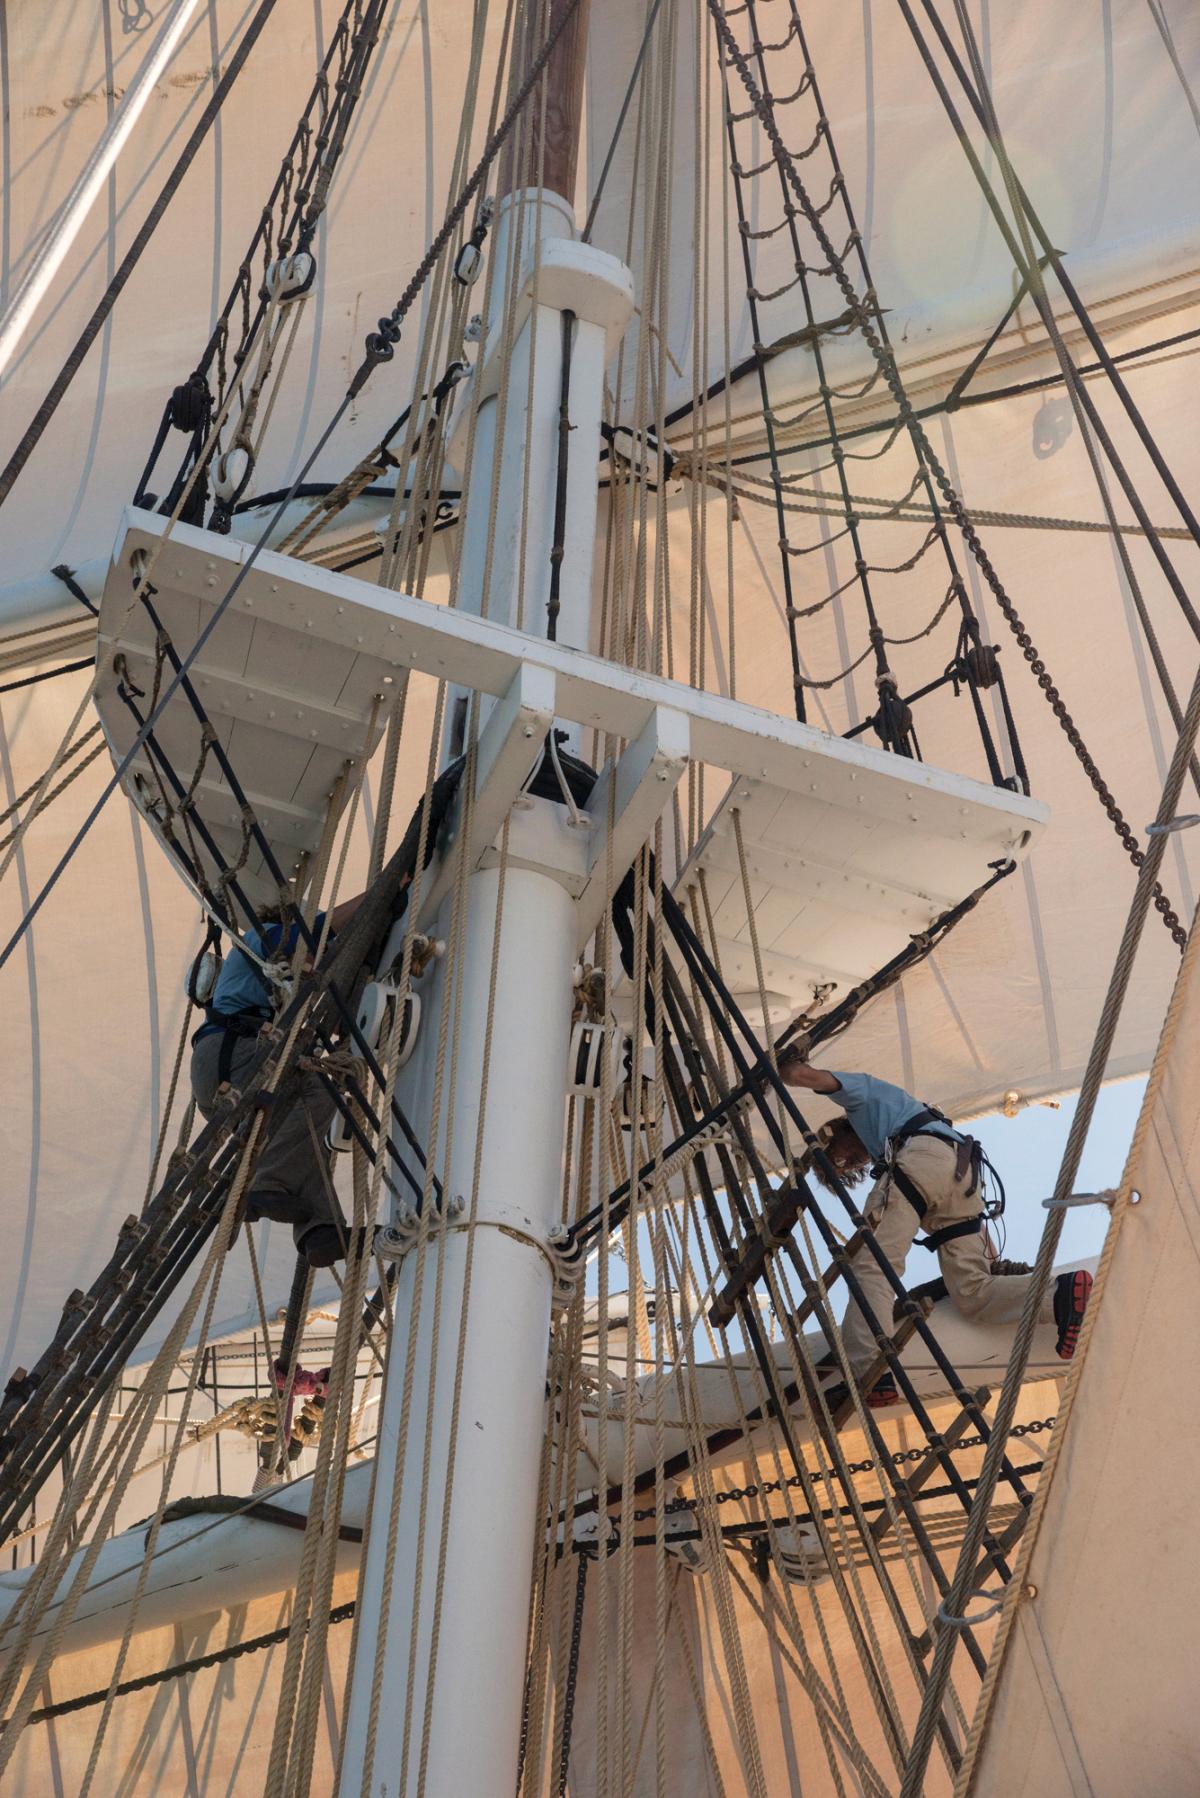 Deckhands climb up into the ropes of the rigging